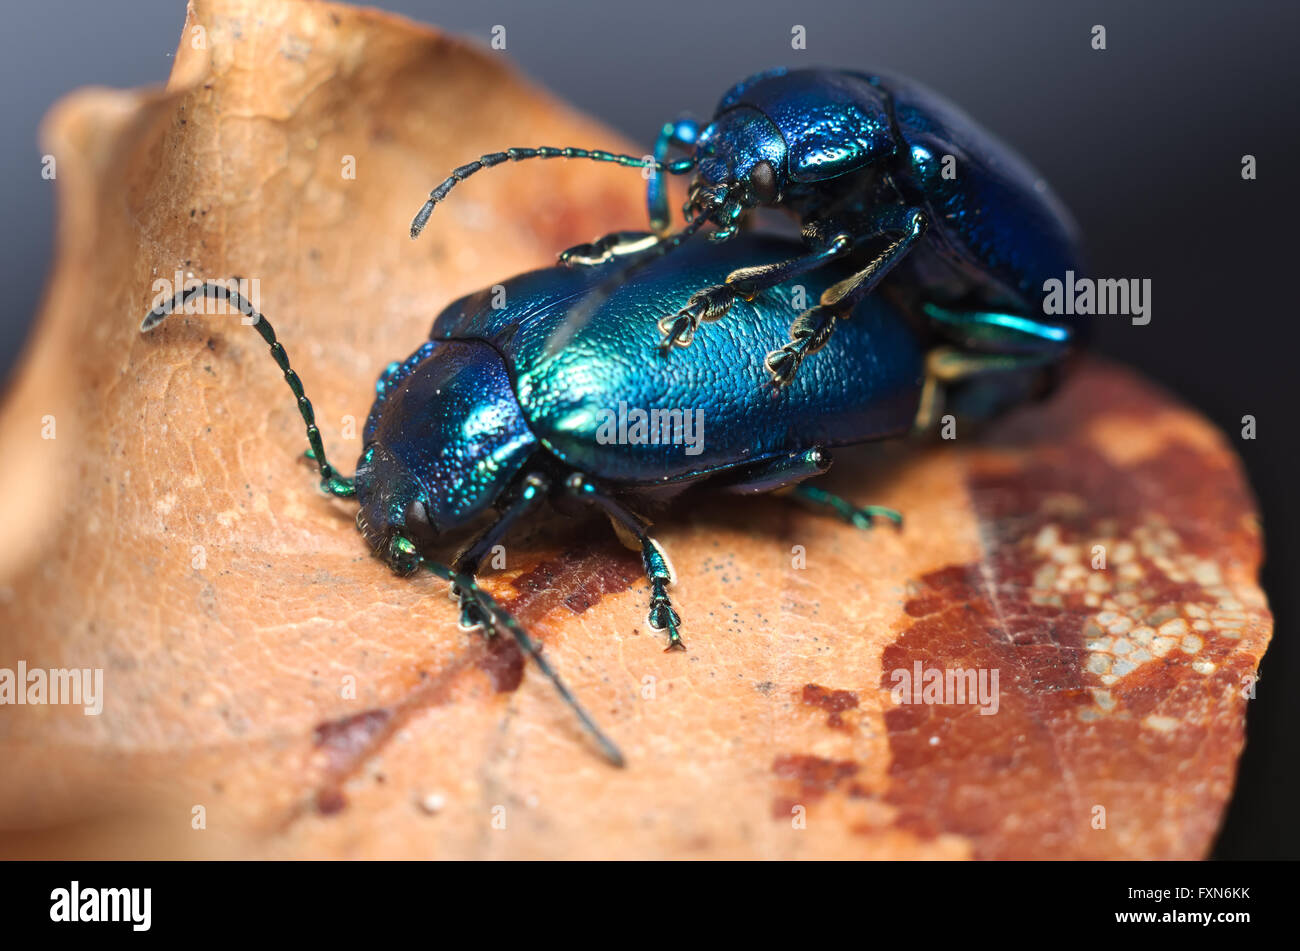 Shiny metallic blue beetle (Oulema obscura) mating on a leaf Stock Photo